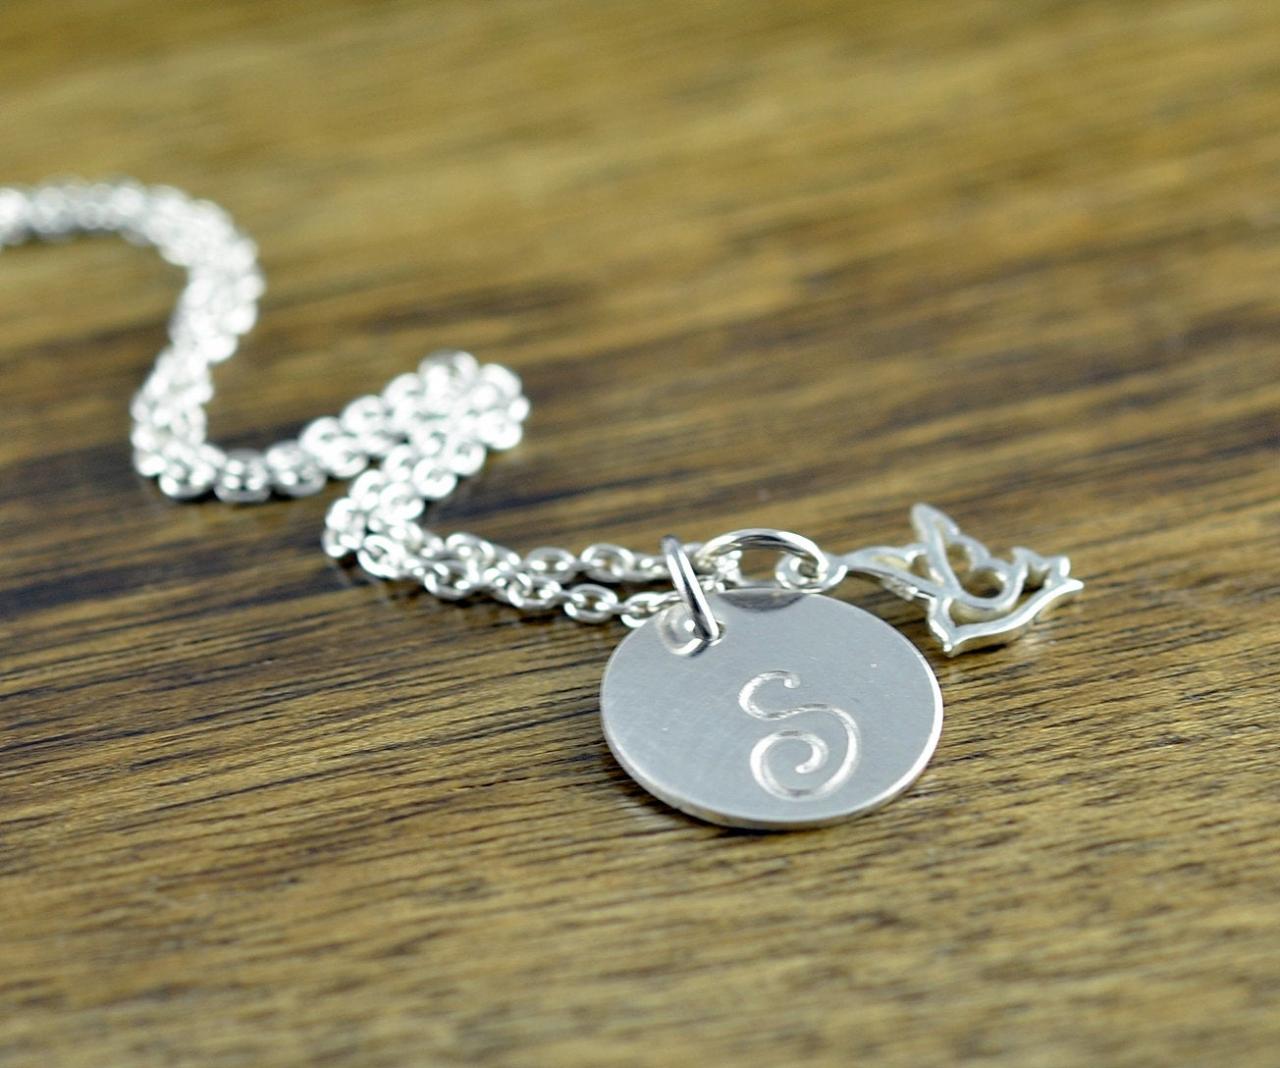 Hummingbird Charm Initial Personalized Sterling Silver Necklace Gift For Her Hummingbird Necklace